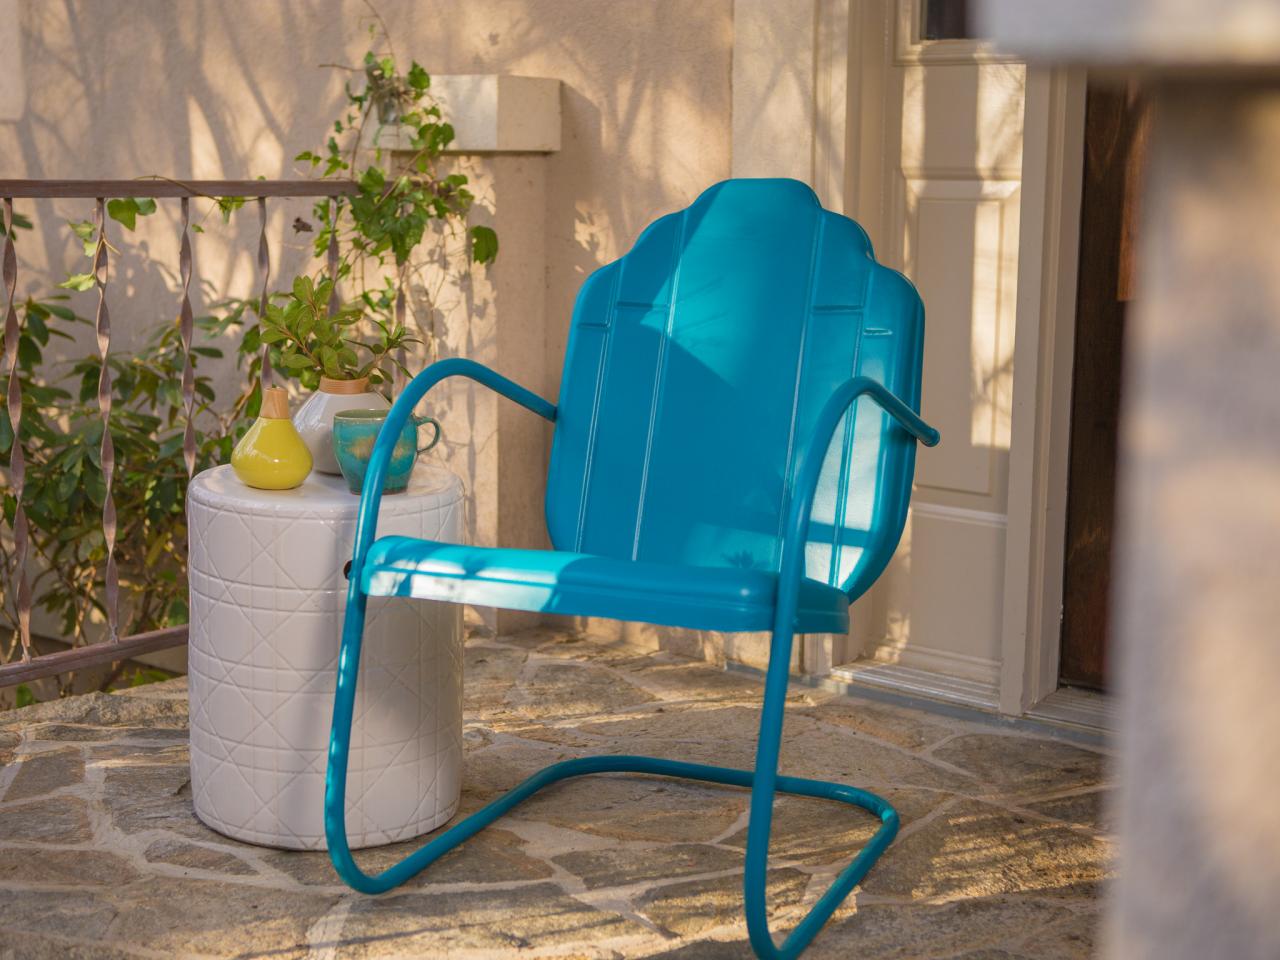 How To Paint An Outdoor Metal Chair, How To Sand Wrought Iron Furniture